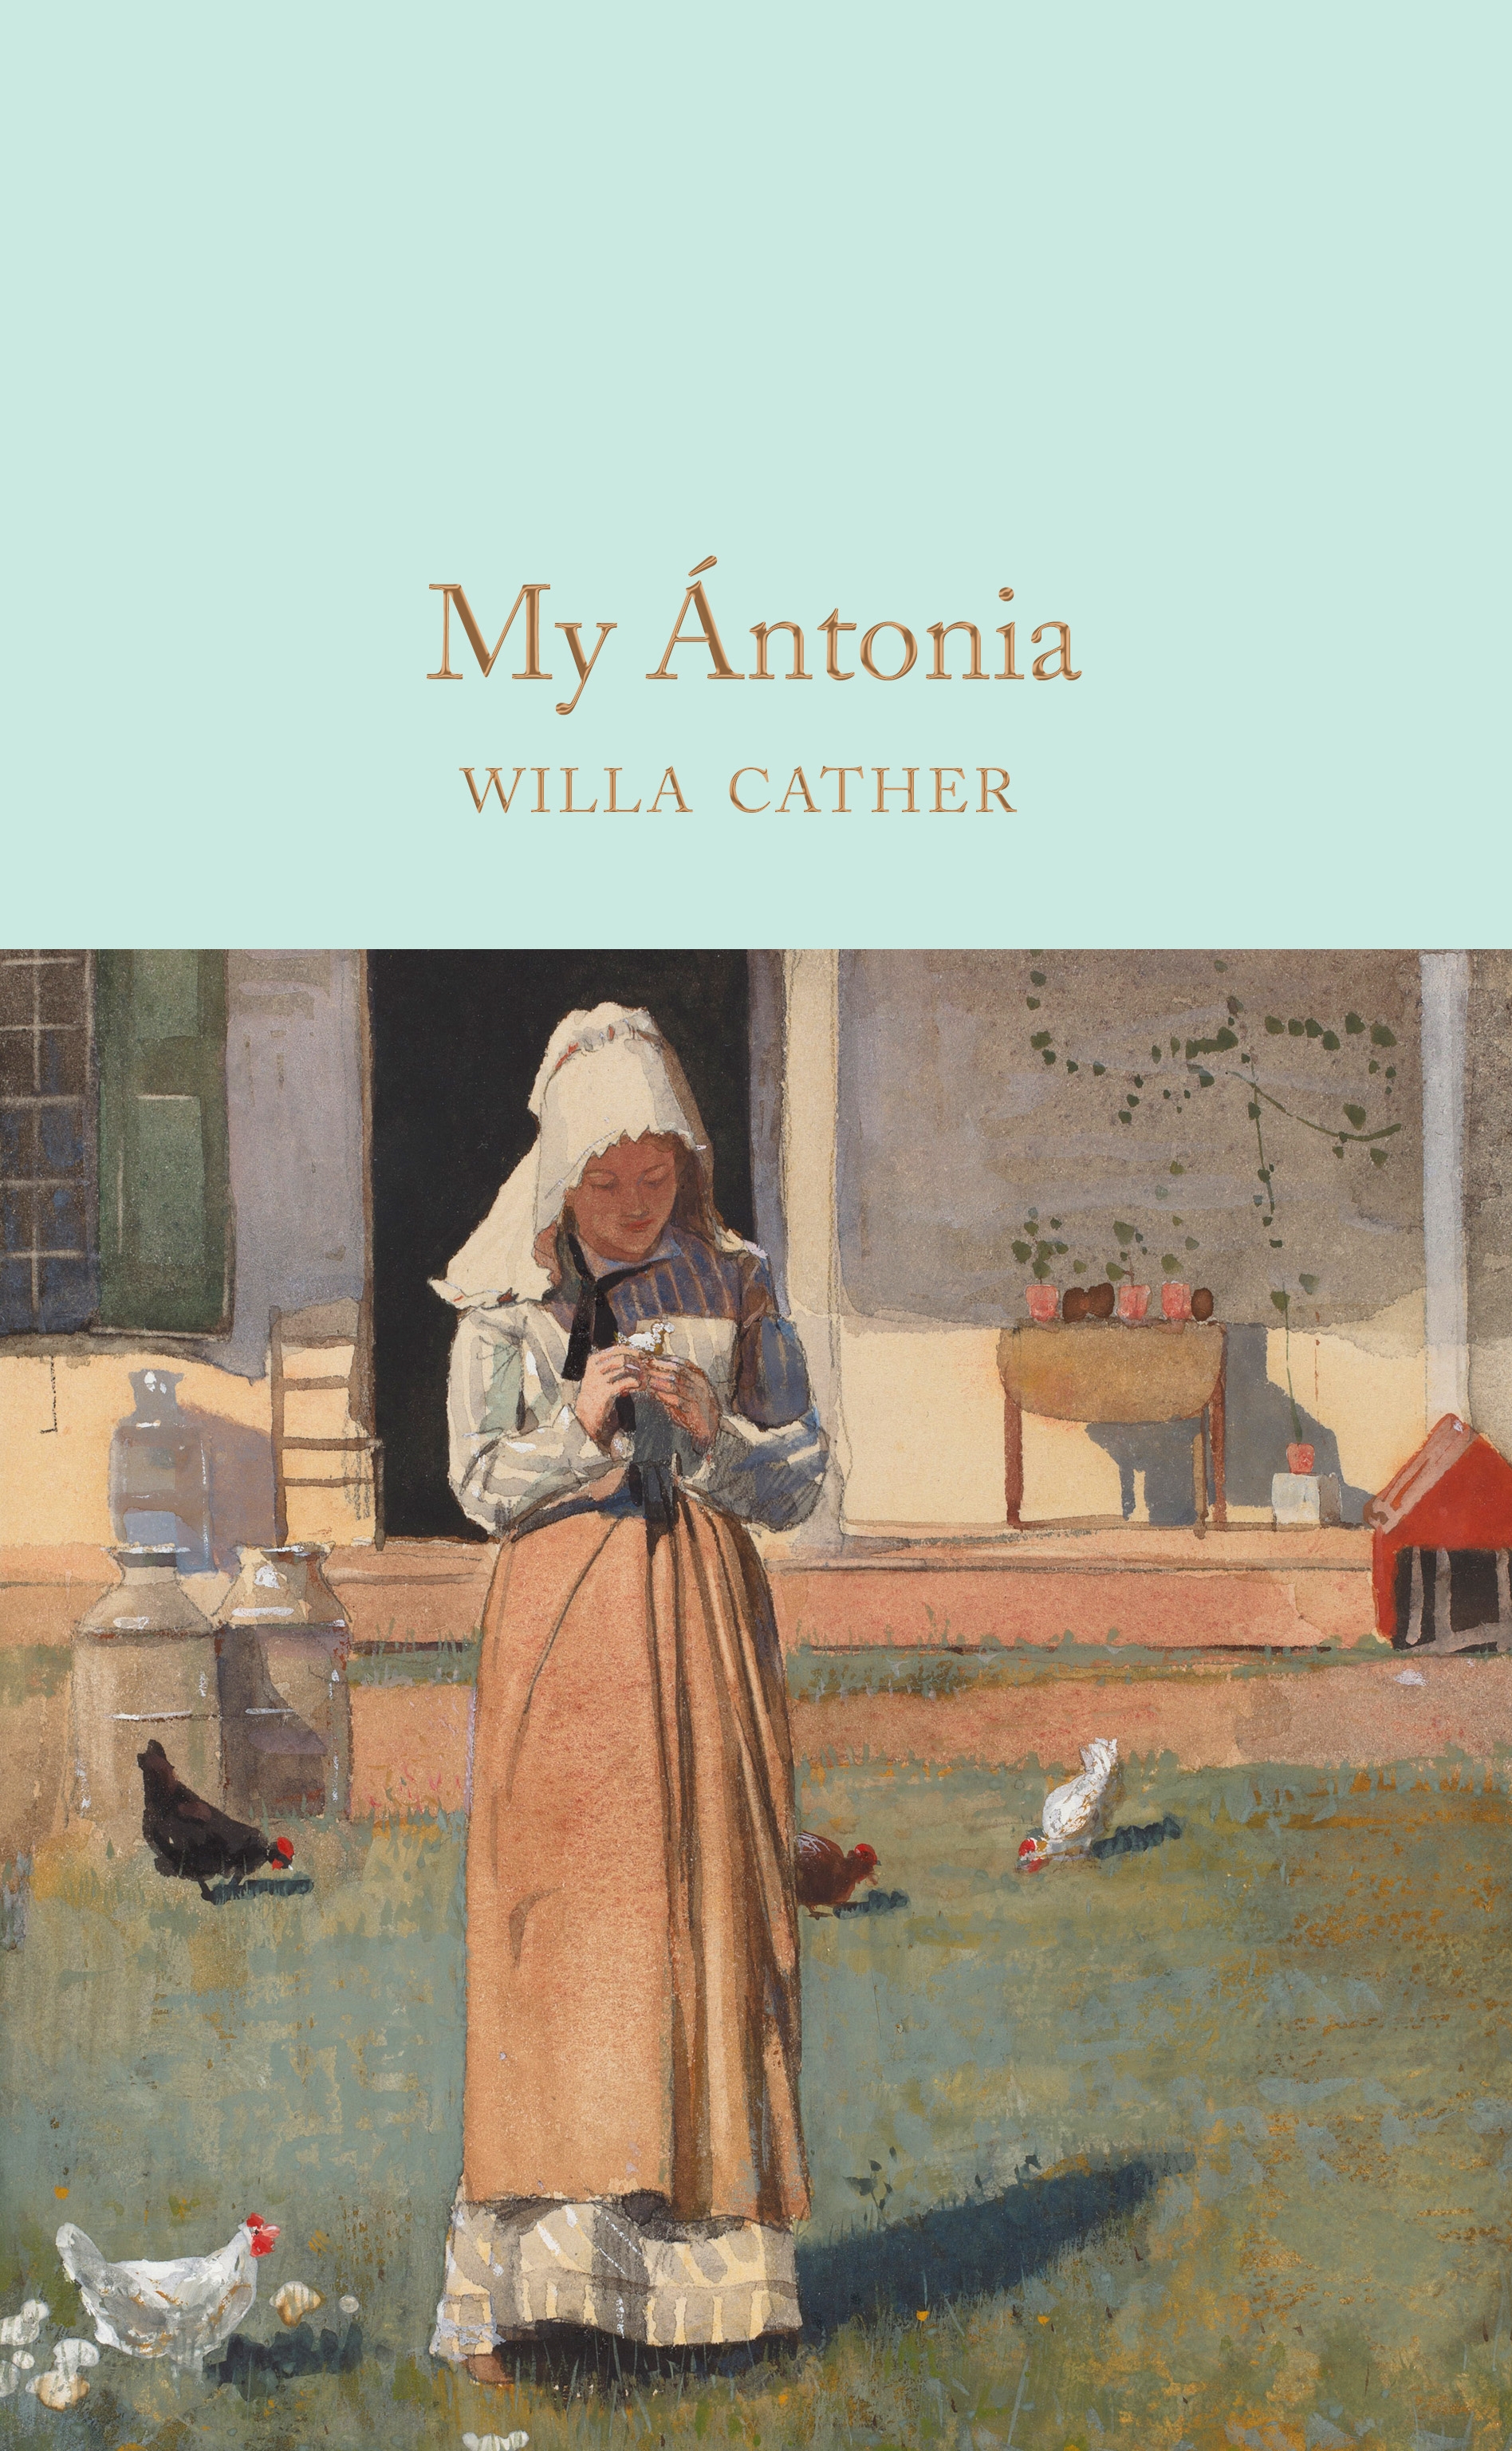 Book “My Ántonia” by Willa Cather — September 3, 2019